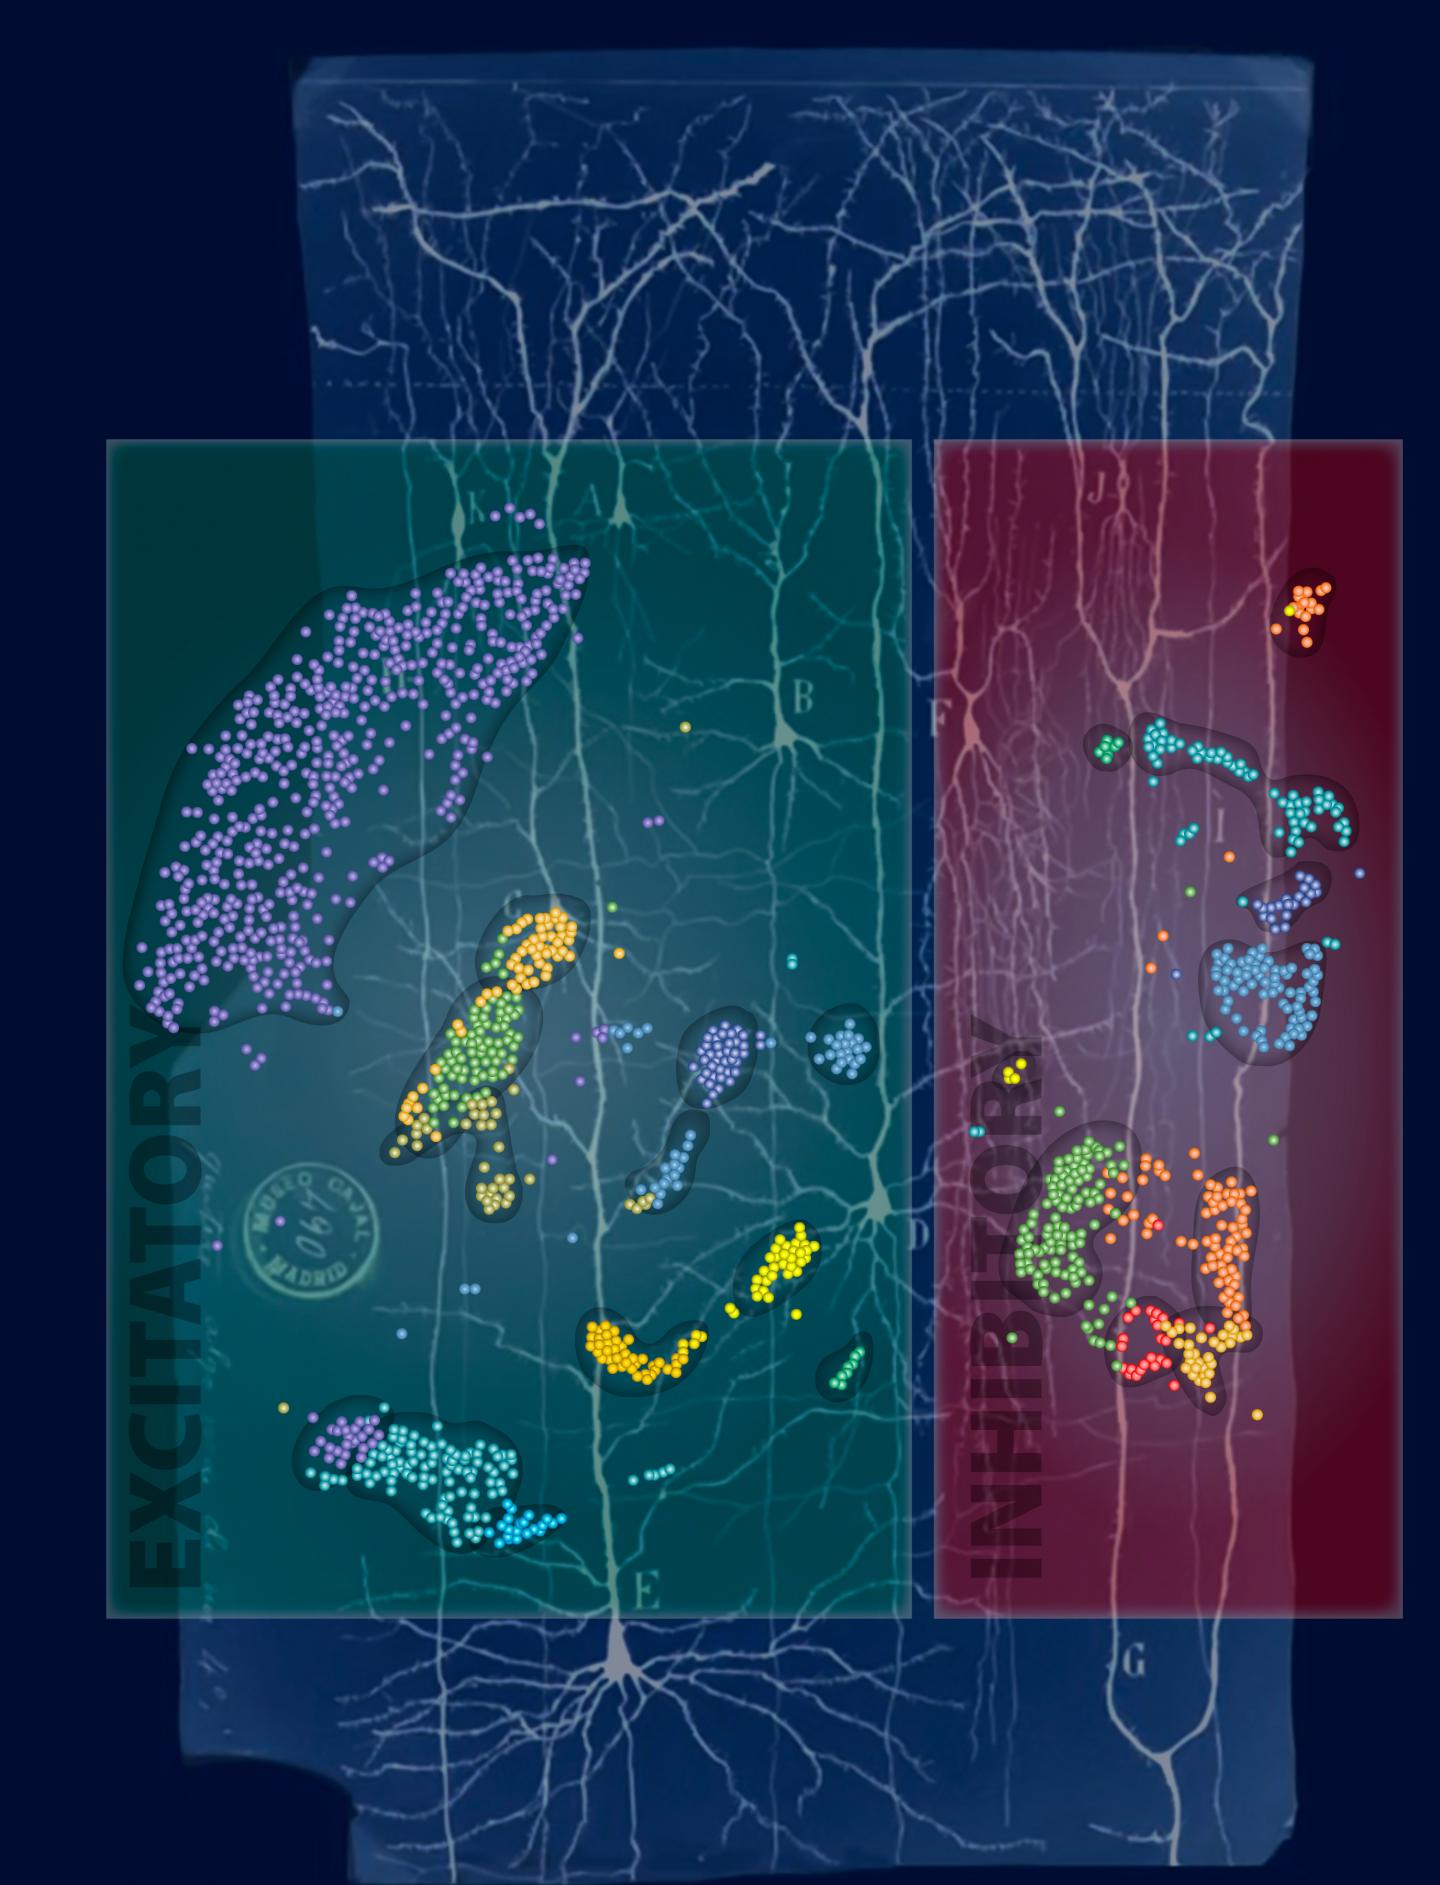 Researchers have demonstrated that neuron subtypes can be recognized by analyzing the DNA methylomes of individual brain cells. In this image, human cortical neuron types—different kinds of “stop” and “go” neurons—are identified by their cytosine methylation signatures, which were resolved with a newly developed single-cell methylome sequencing method. The colored dots in the image indicate distinct neuronal clusters. To suggest how the new technique extends morphological analysis, the image superimposes the colored dots on an image derived from the work of legendary scientist Santiago Ramón y Cajal (1852–1934). [Jamie Simon/Salk Institute]